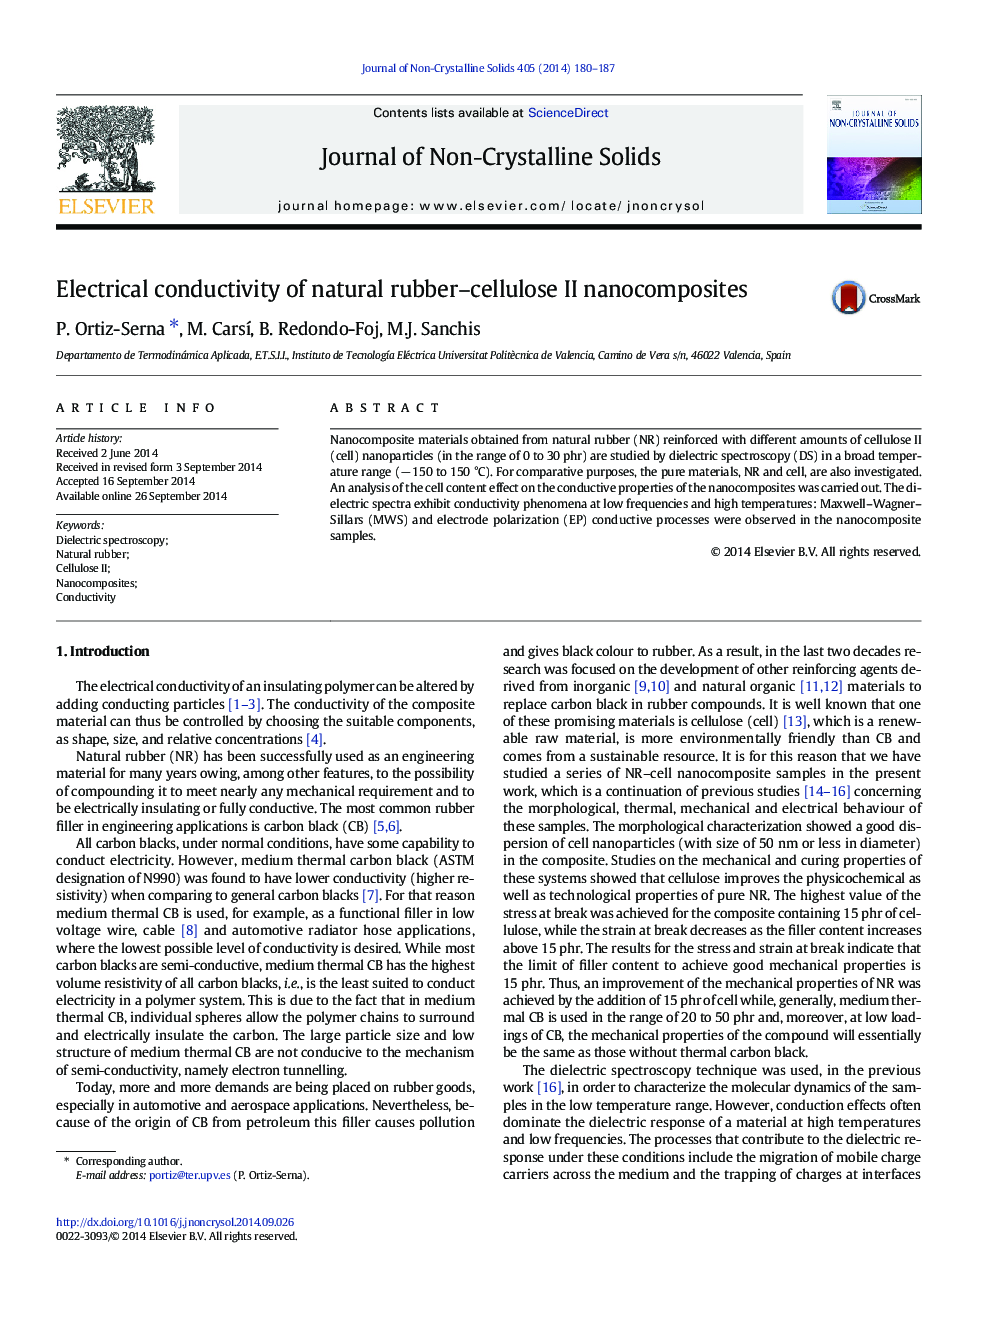 Electrical conductivity of natural rubber–cellulose II nanocomposites